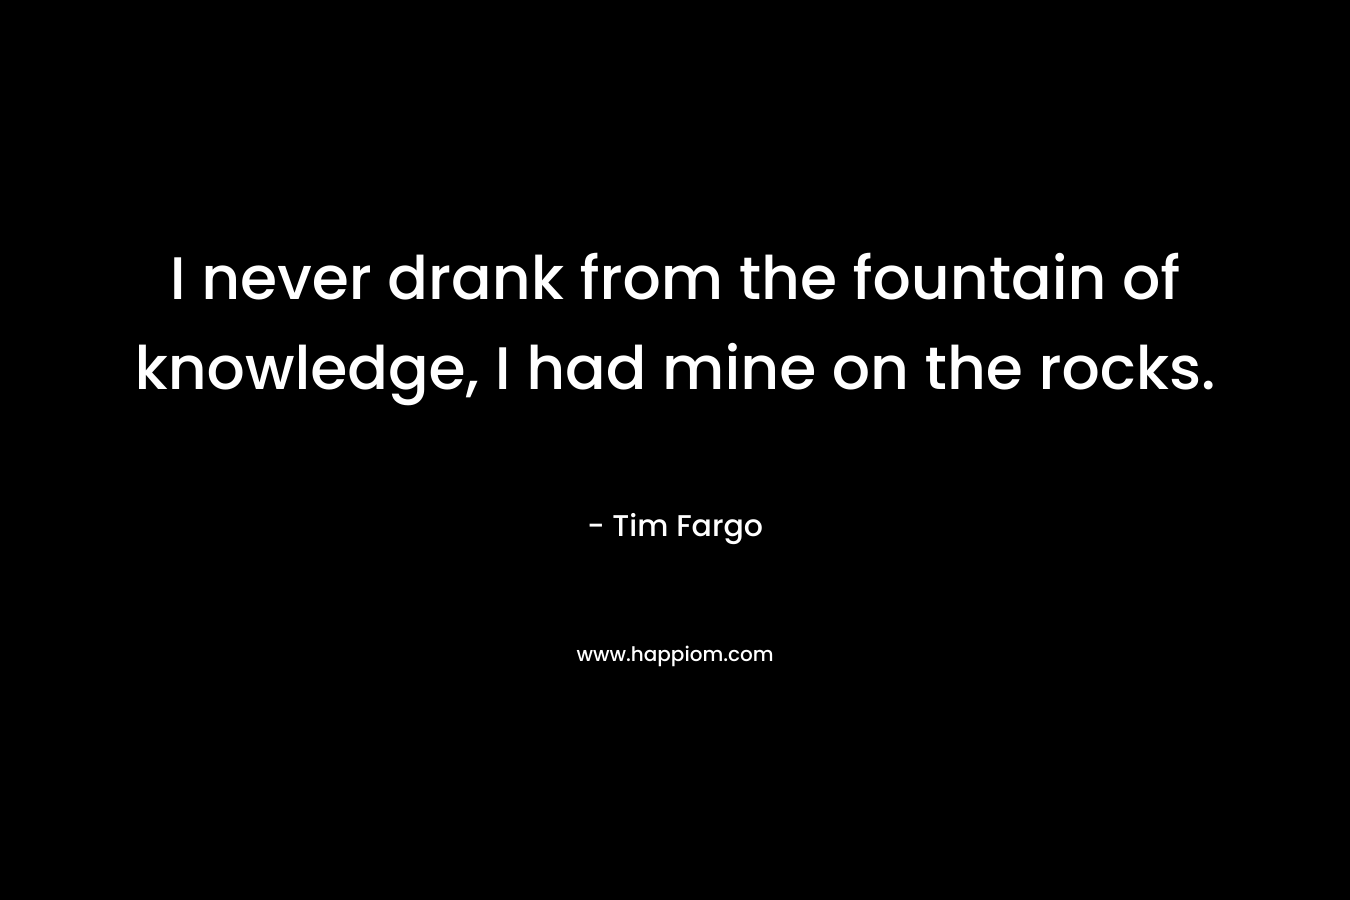 I never drank from the fountain of knowledge, I had mine on the rocks. – Tim Fargo